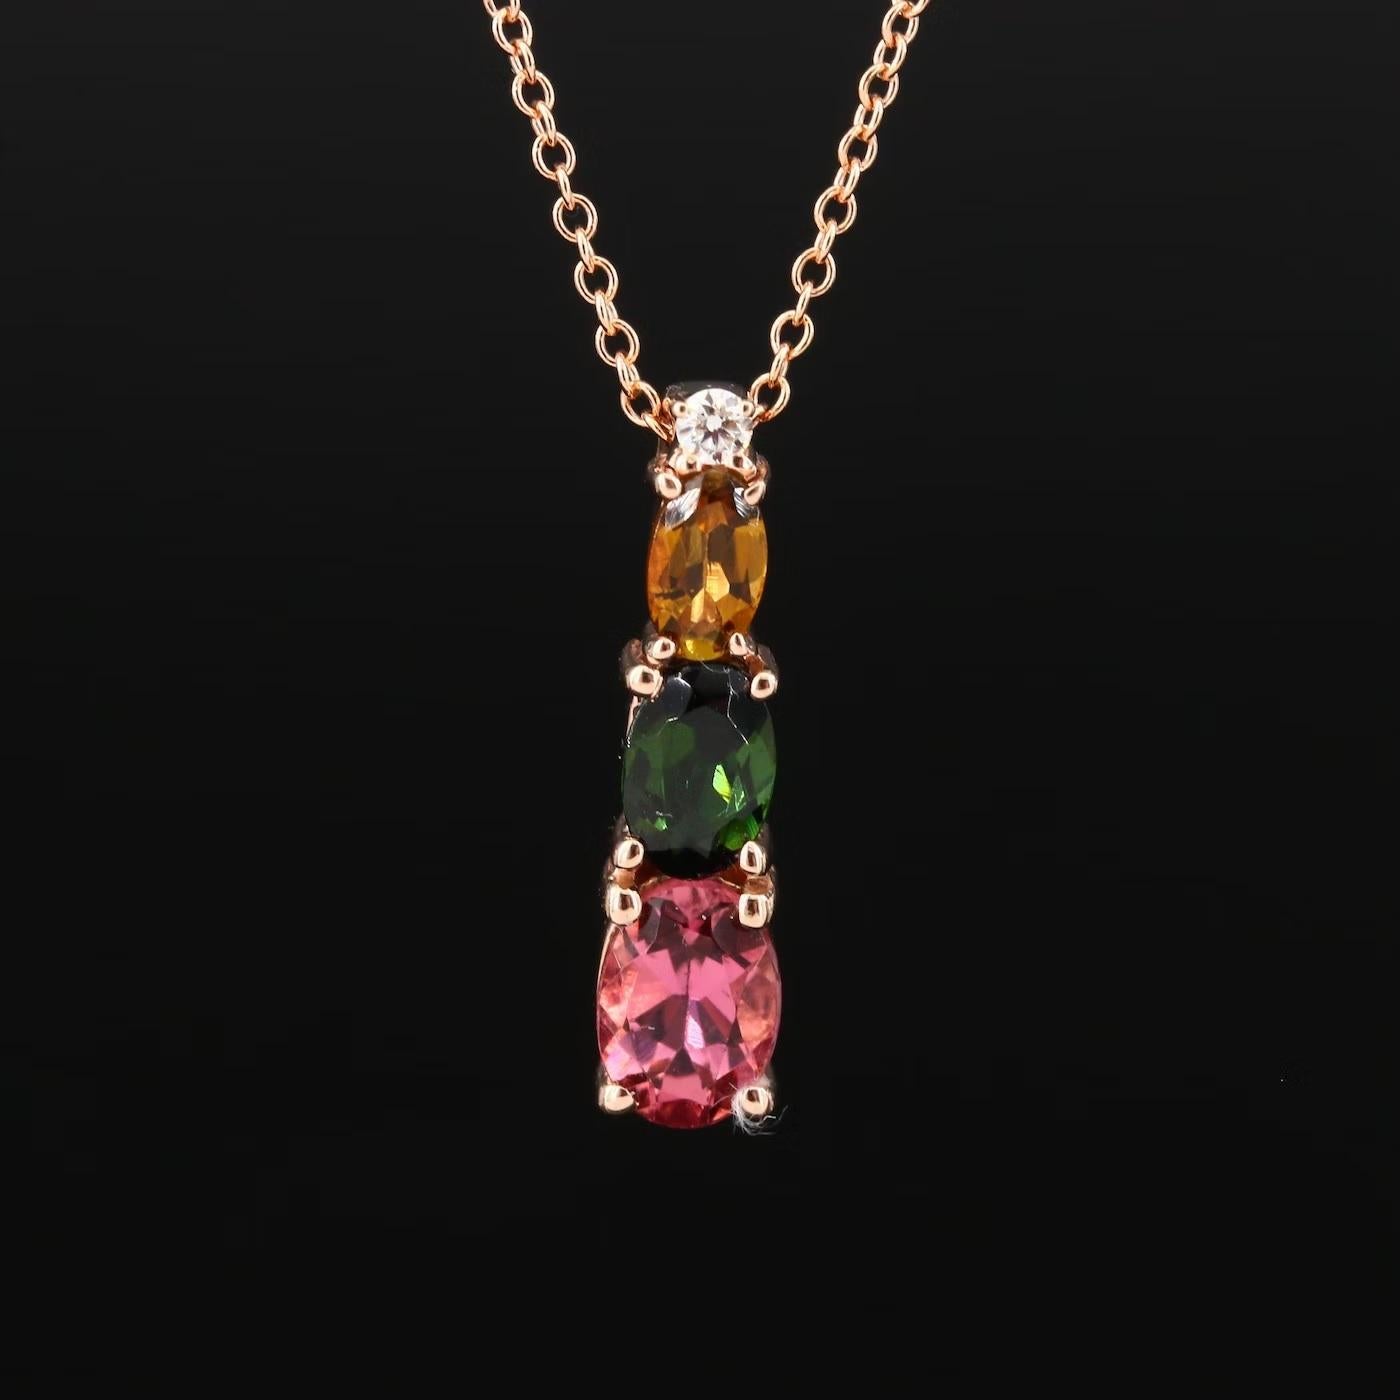 Designer EFFY necklace, stamped EFFY

Watercolors collection

NEW with tags, Tag price $3750

14K Rose gold, stamped 14K

2.35 CT of High Quality diamond and Natural multicolor Tourmaline 

Necklace chain is 18 inches, 14K

Comes with gift box